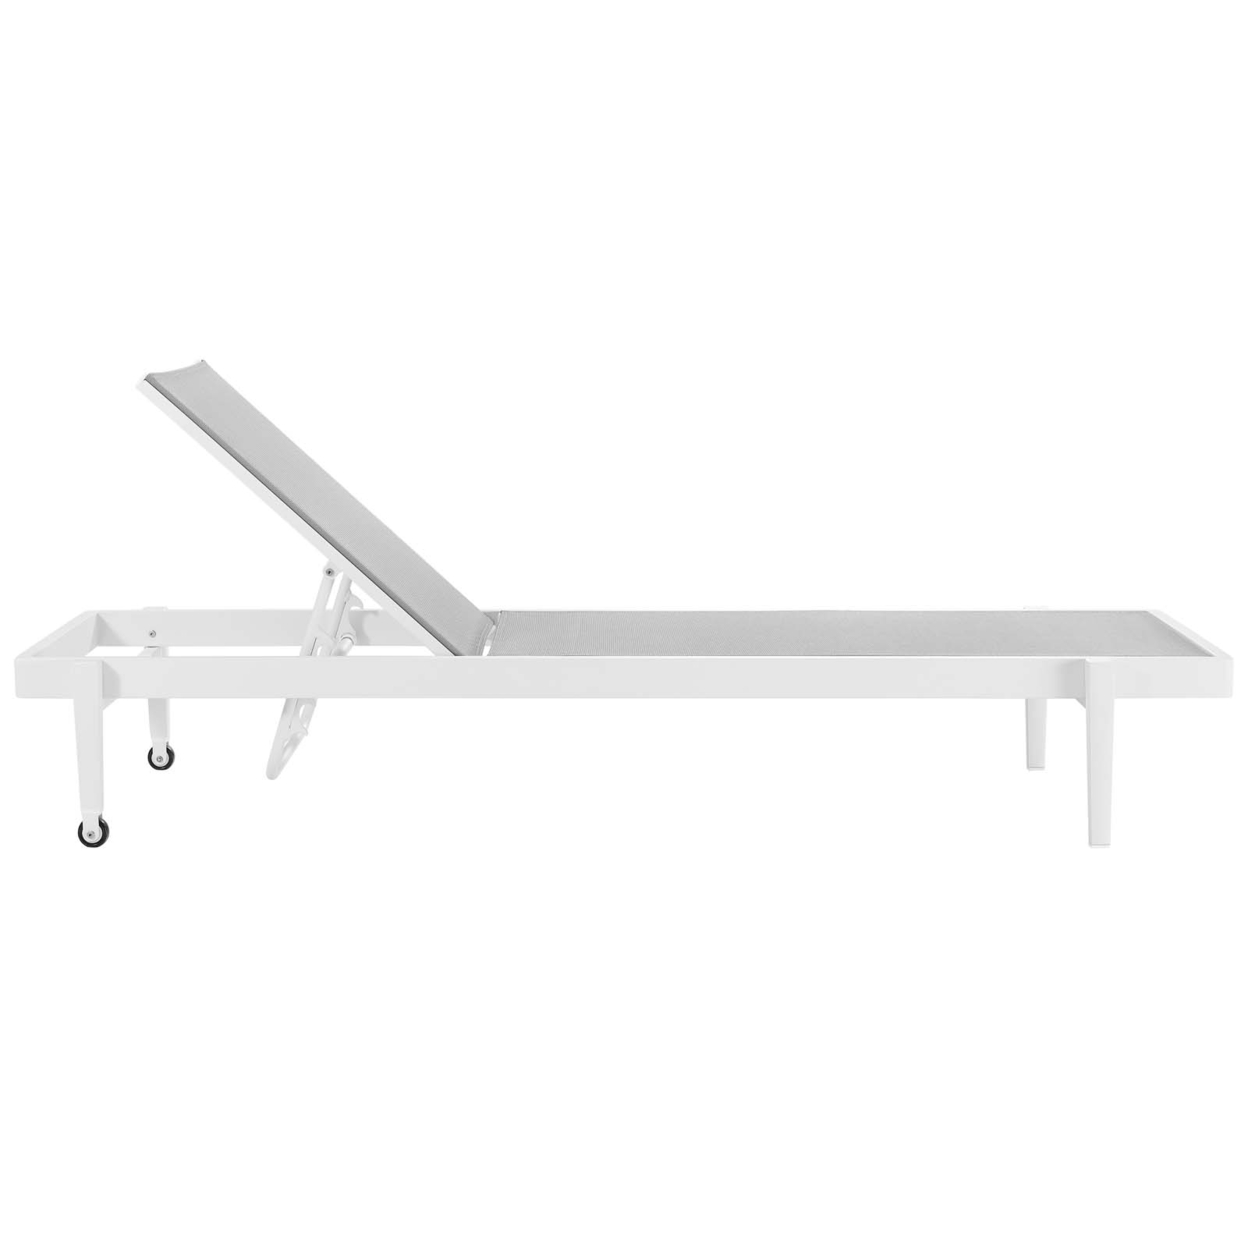 Modway Charleston Metal Aluminum Patio Chaise Lounge Chair in White/Gray - image 3 of 7